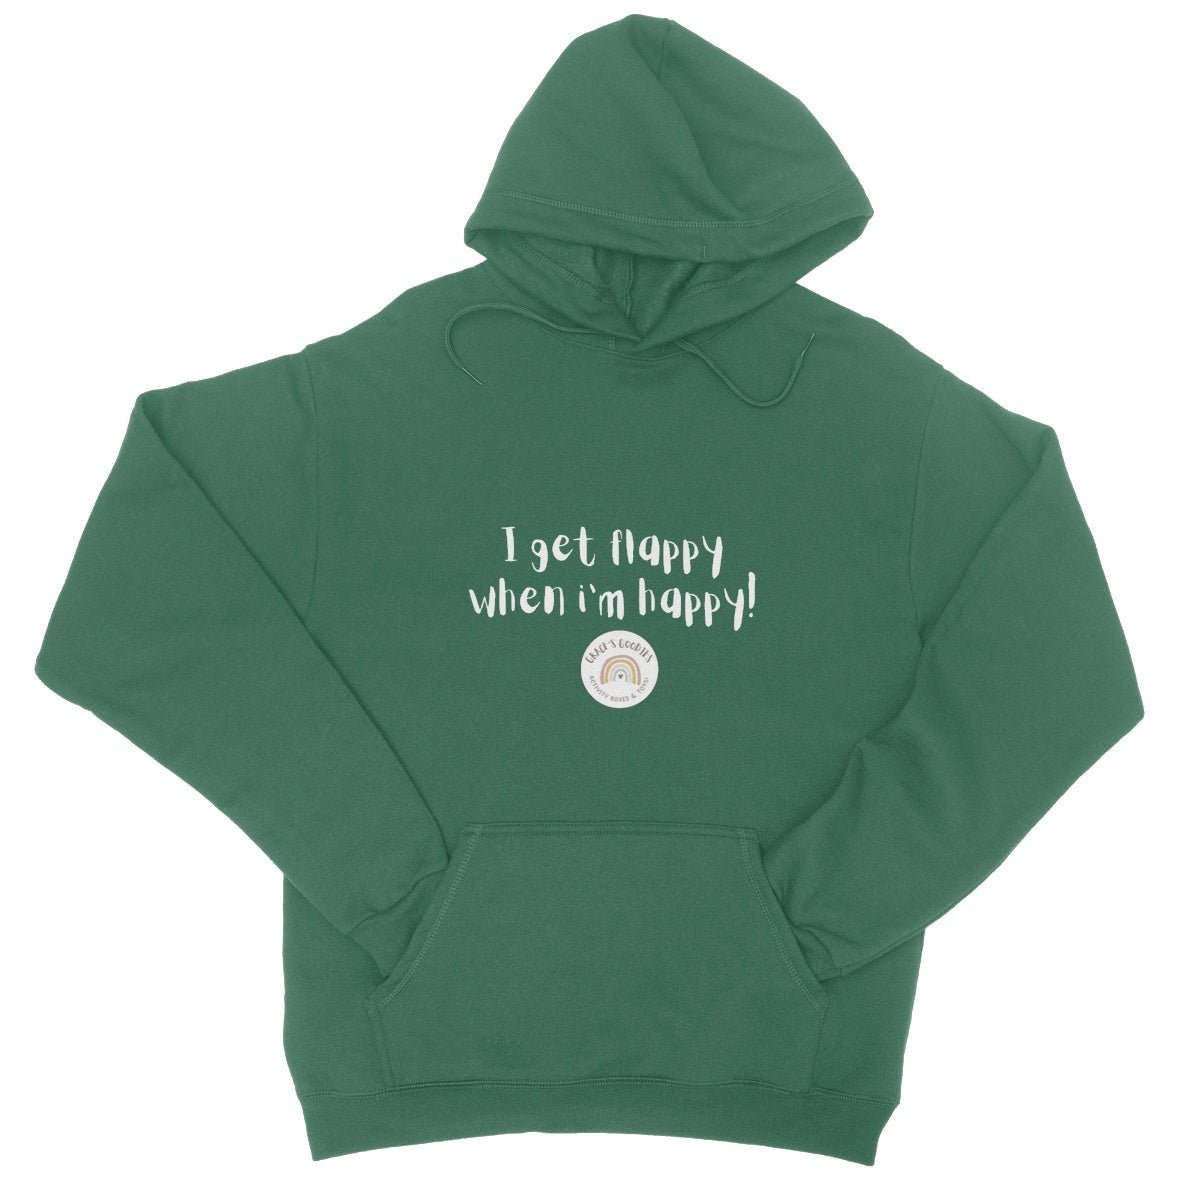 I get flappy when i'm happy College Hoodie - Adult